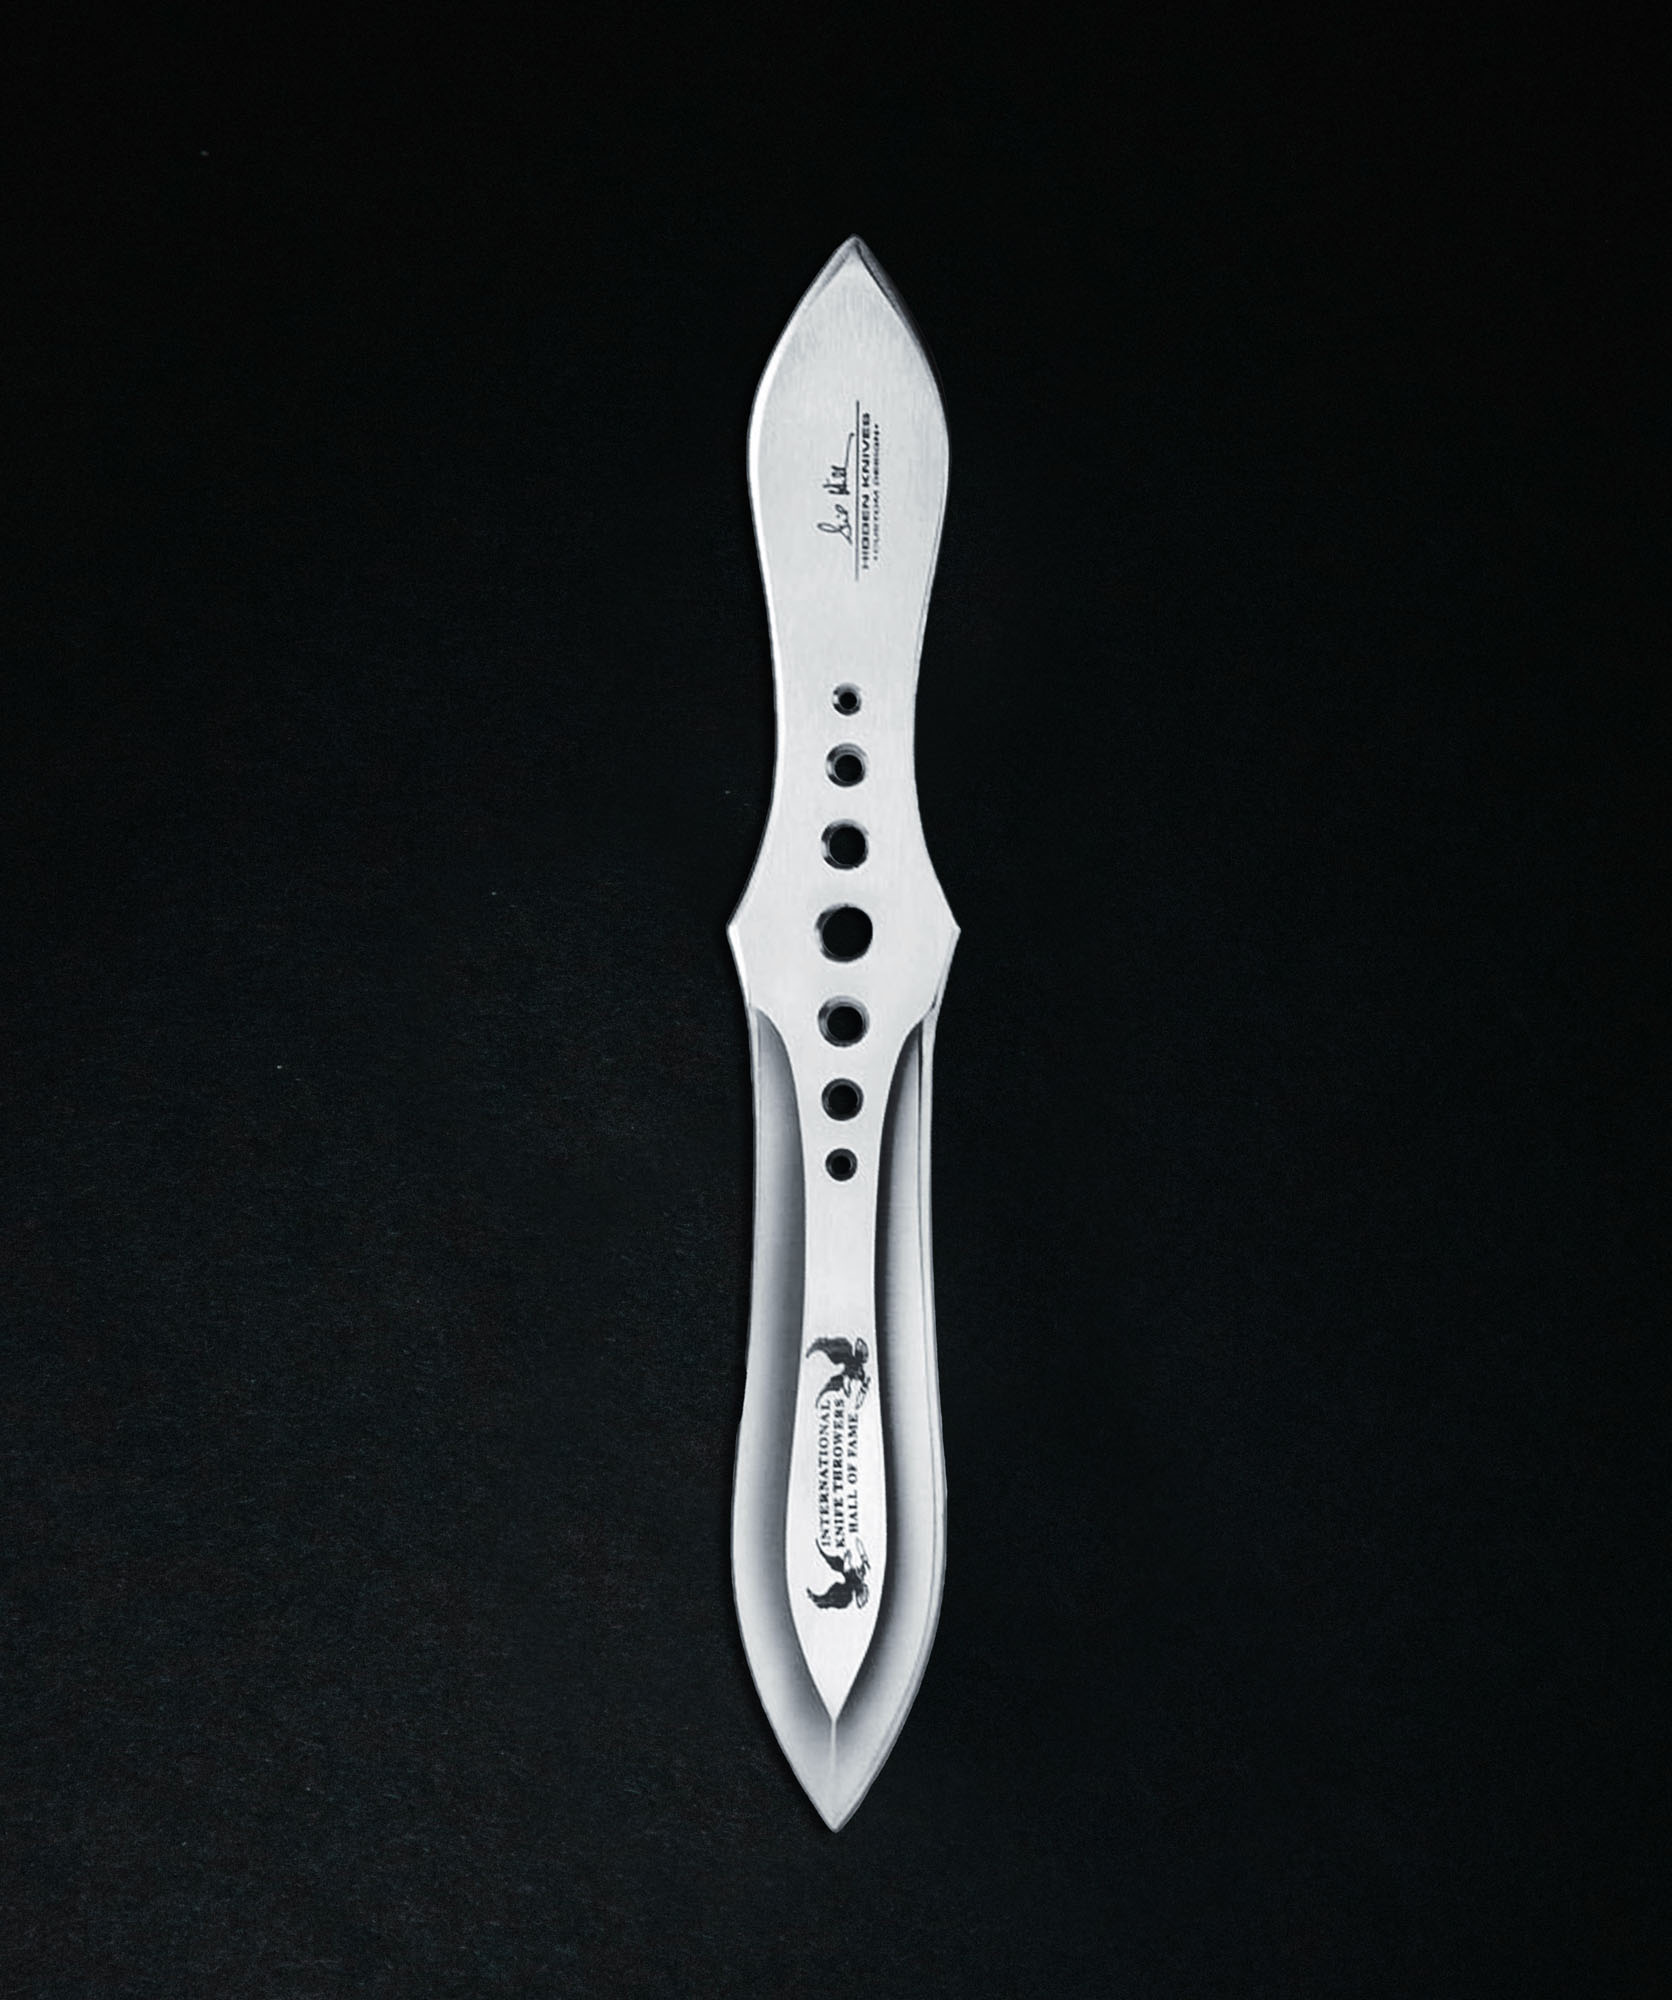 Hibben Competition Thrower Triple Set small